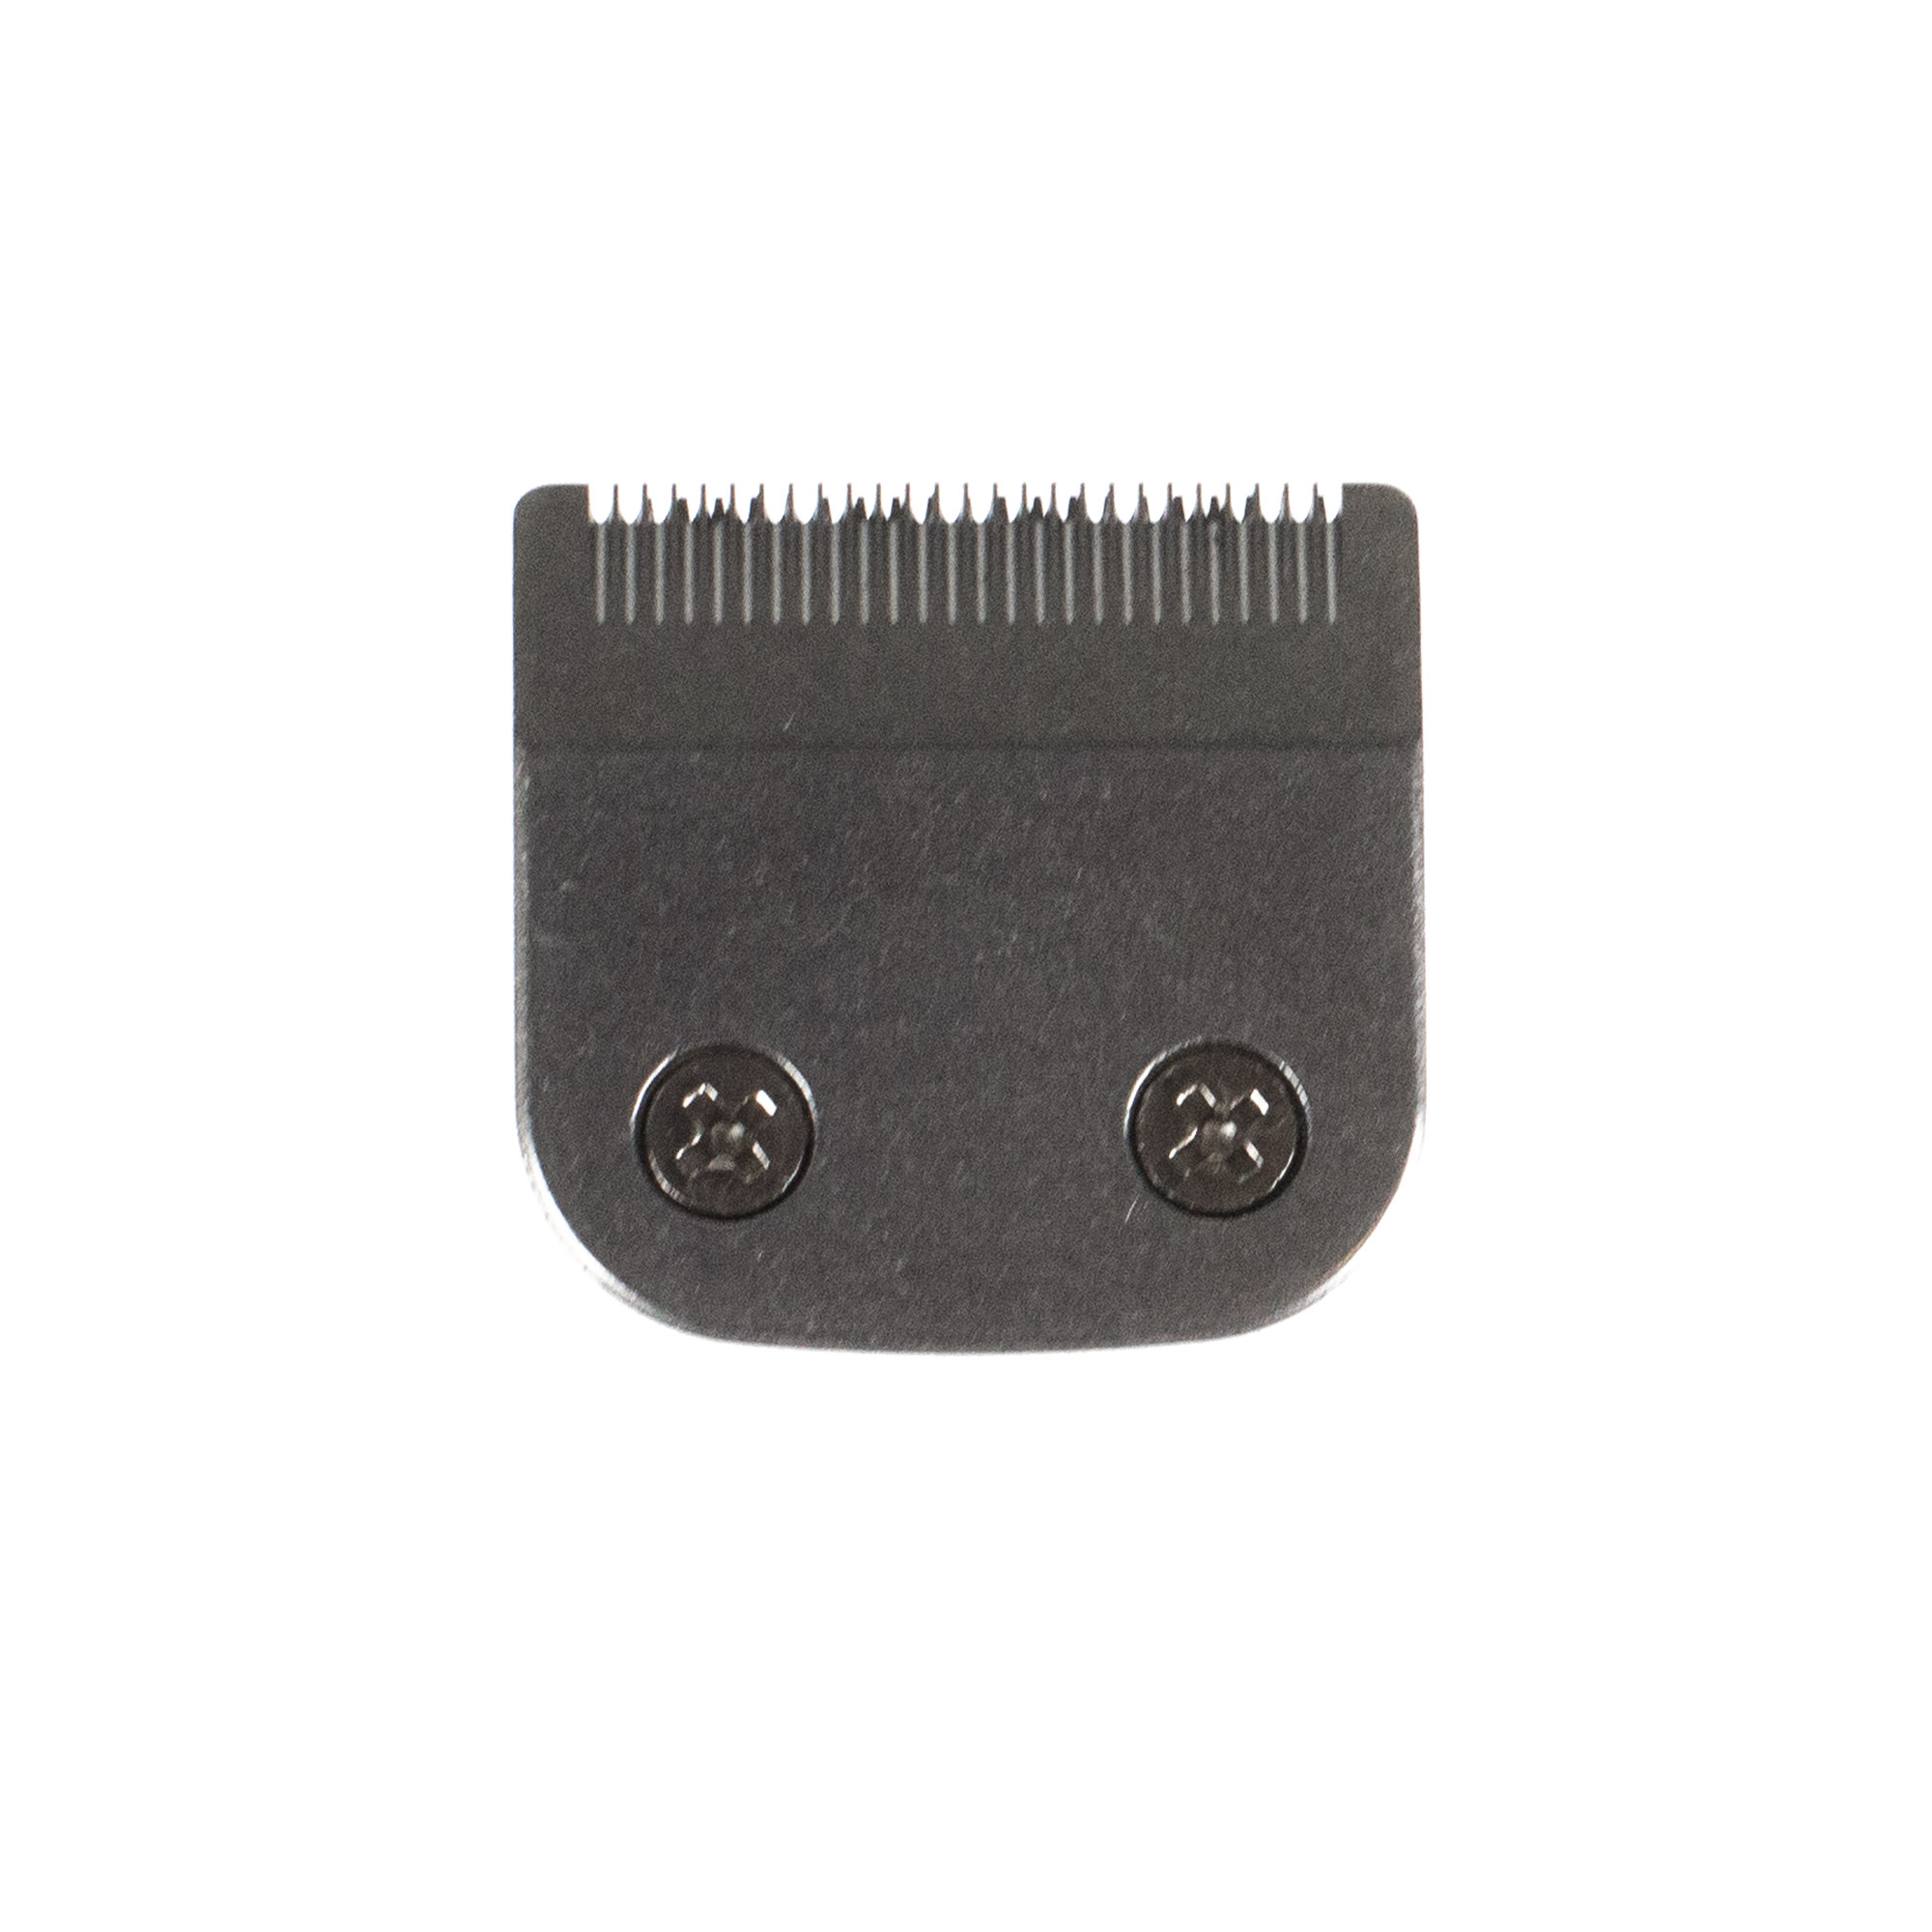 wahl beard trimmer replacement blades